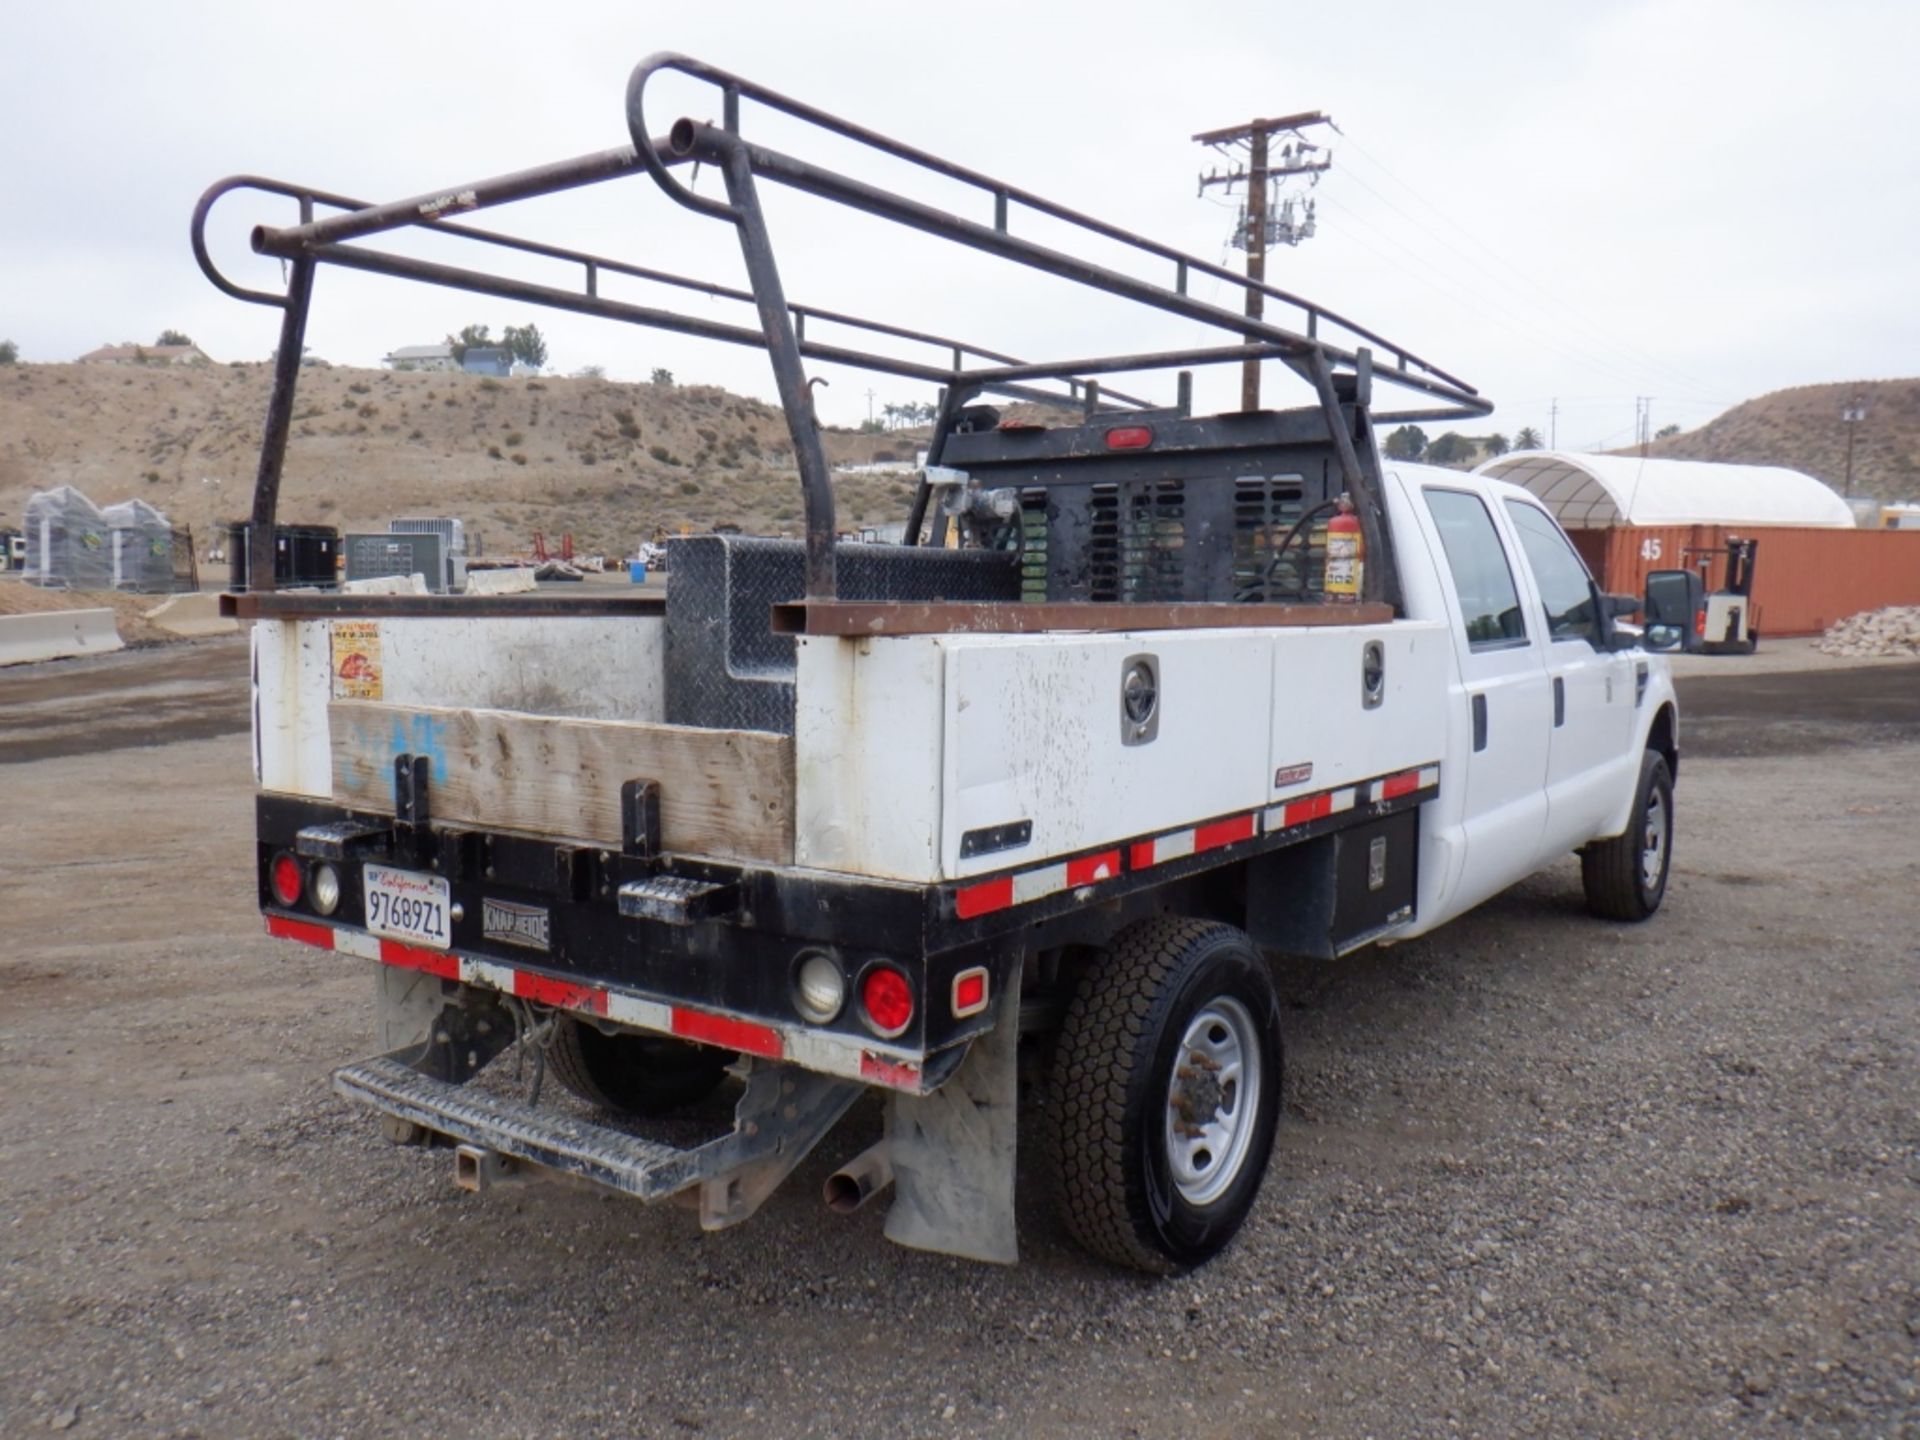 2010 Ford F250 Crew Cab Flatbed Truck, - Image 3 of 24